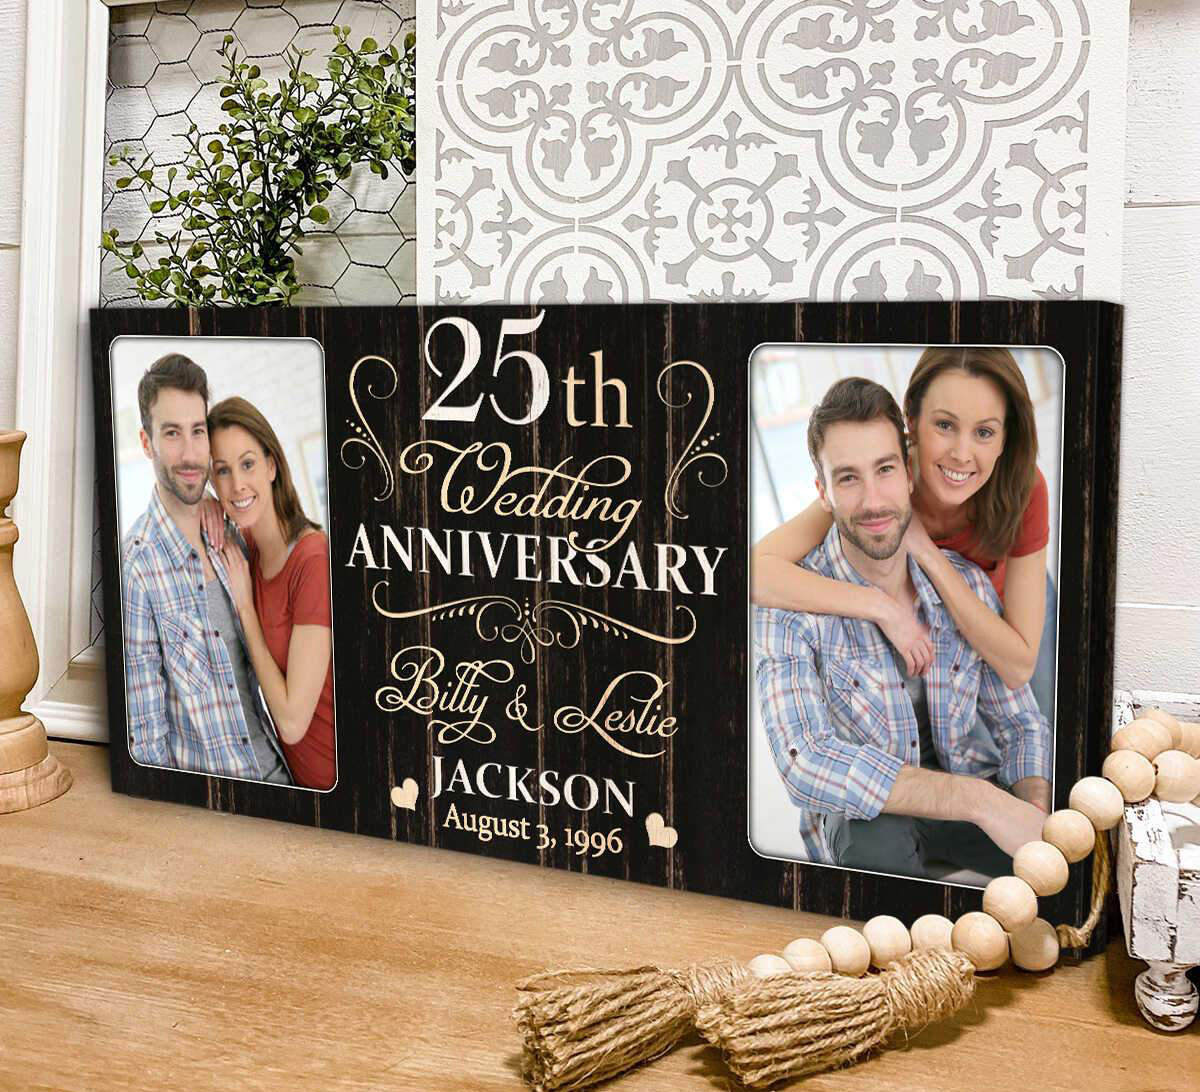 Best 25th Anniversary Gift Ideas For Couple Online - Angroos